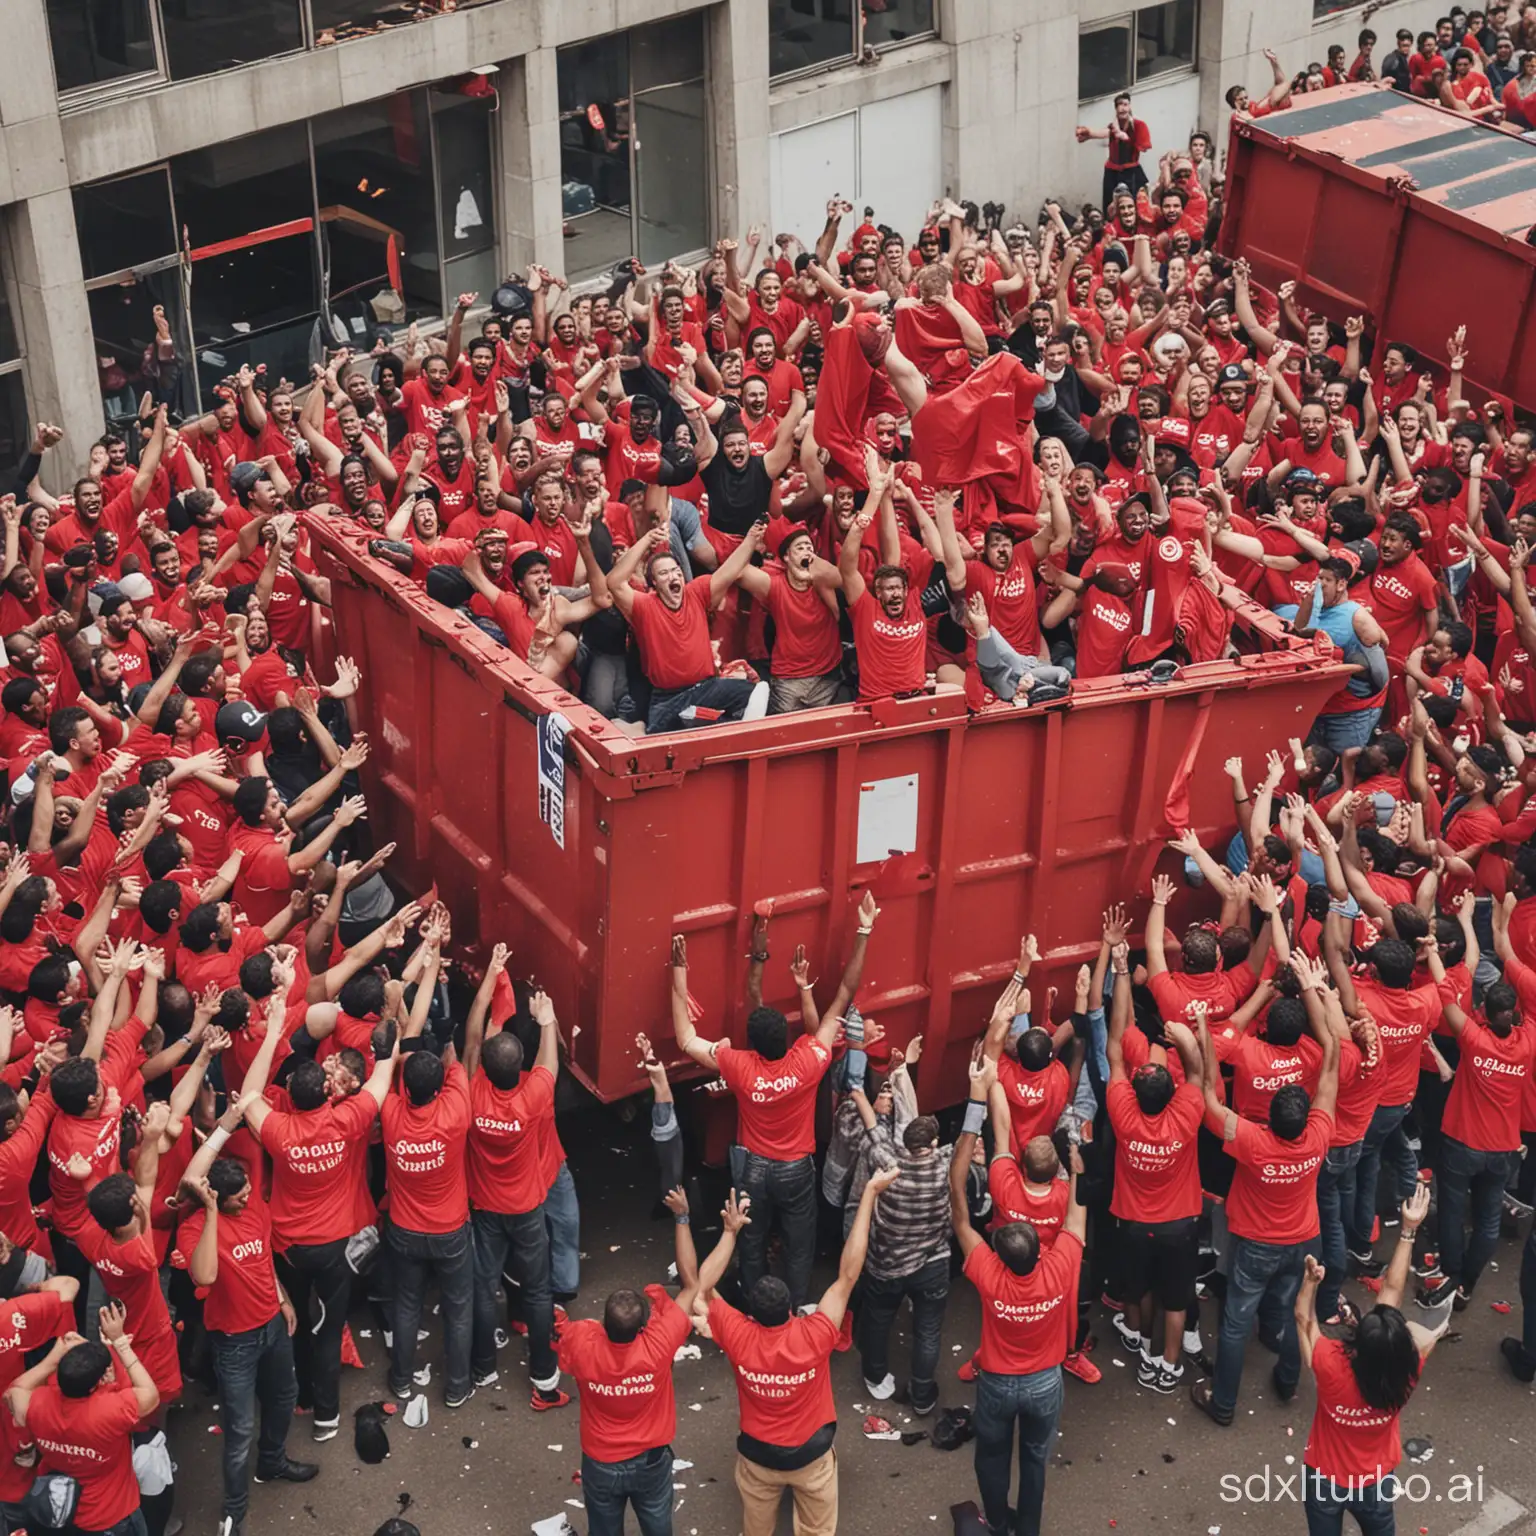 Celebrating-Workers-Gathered-Around-Red-Dumpster